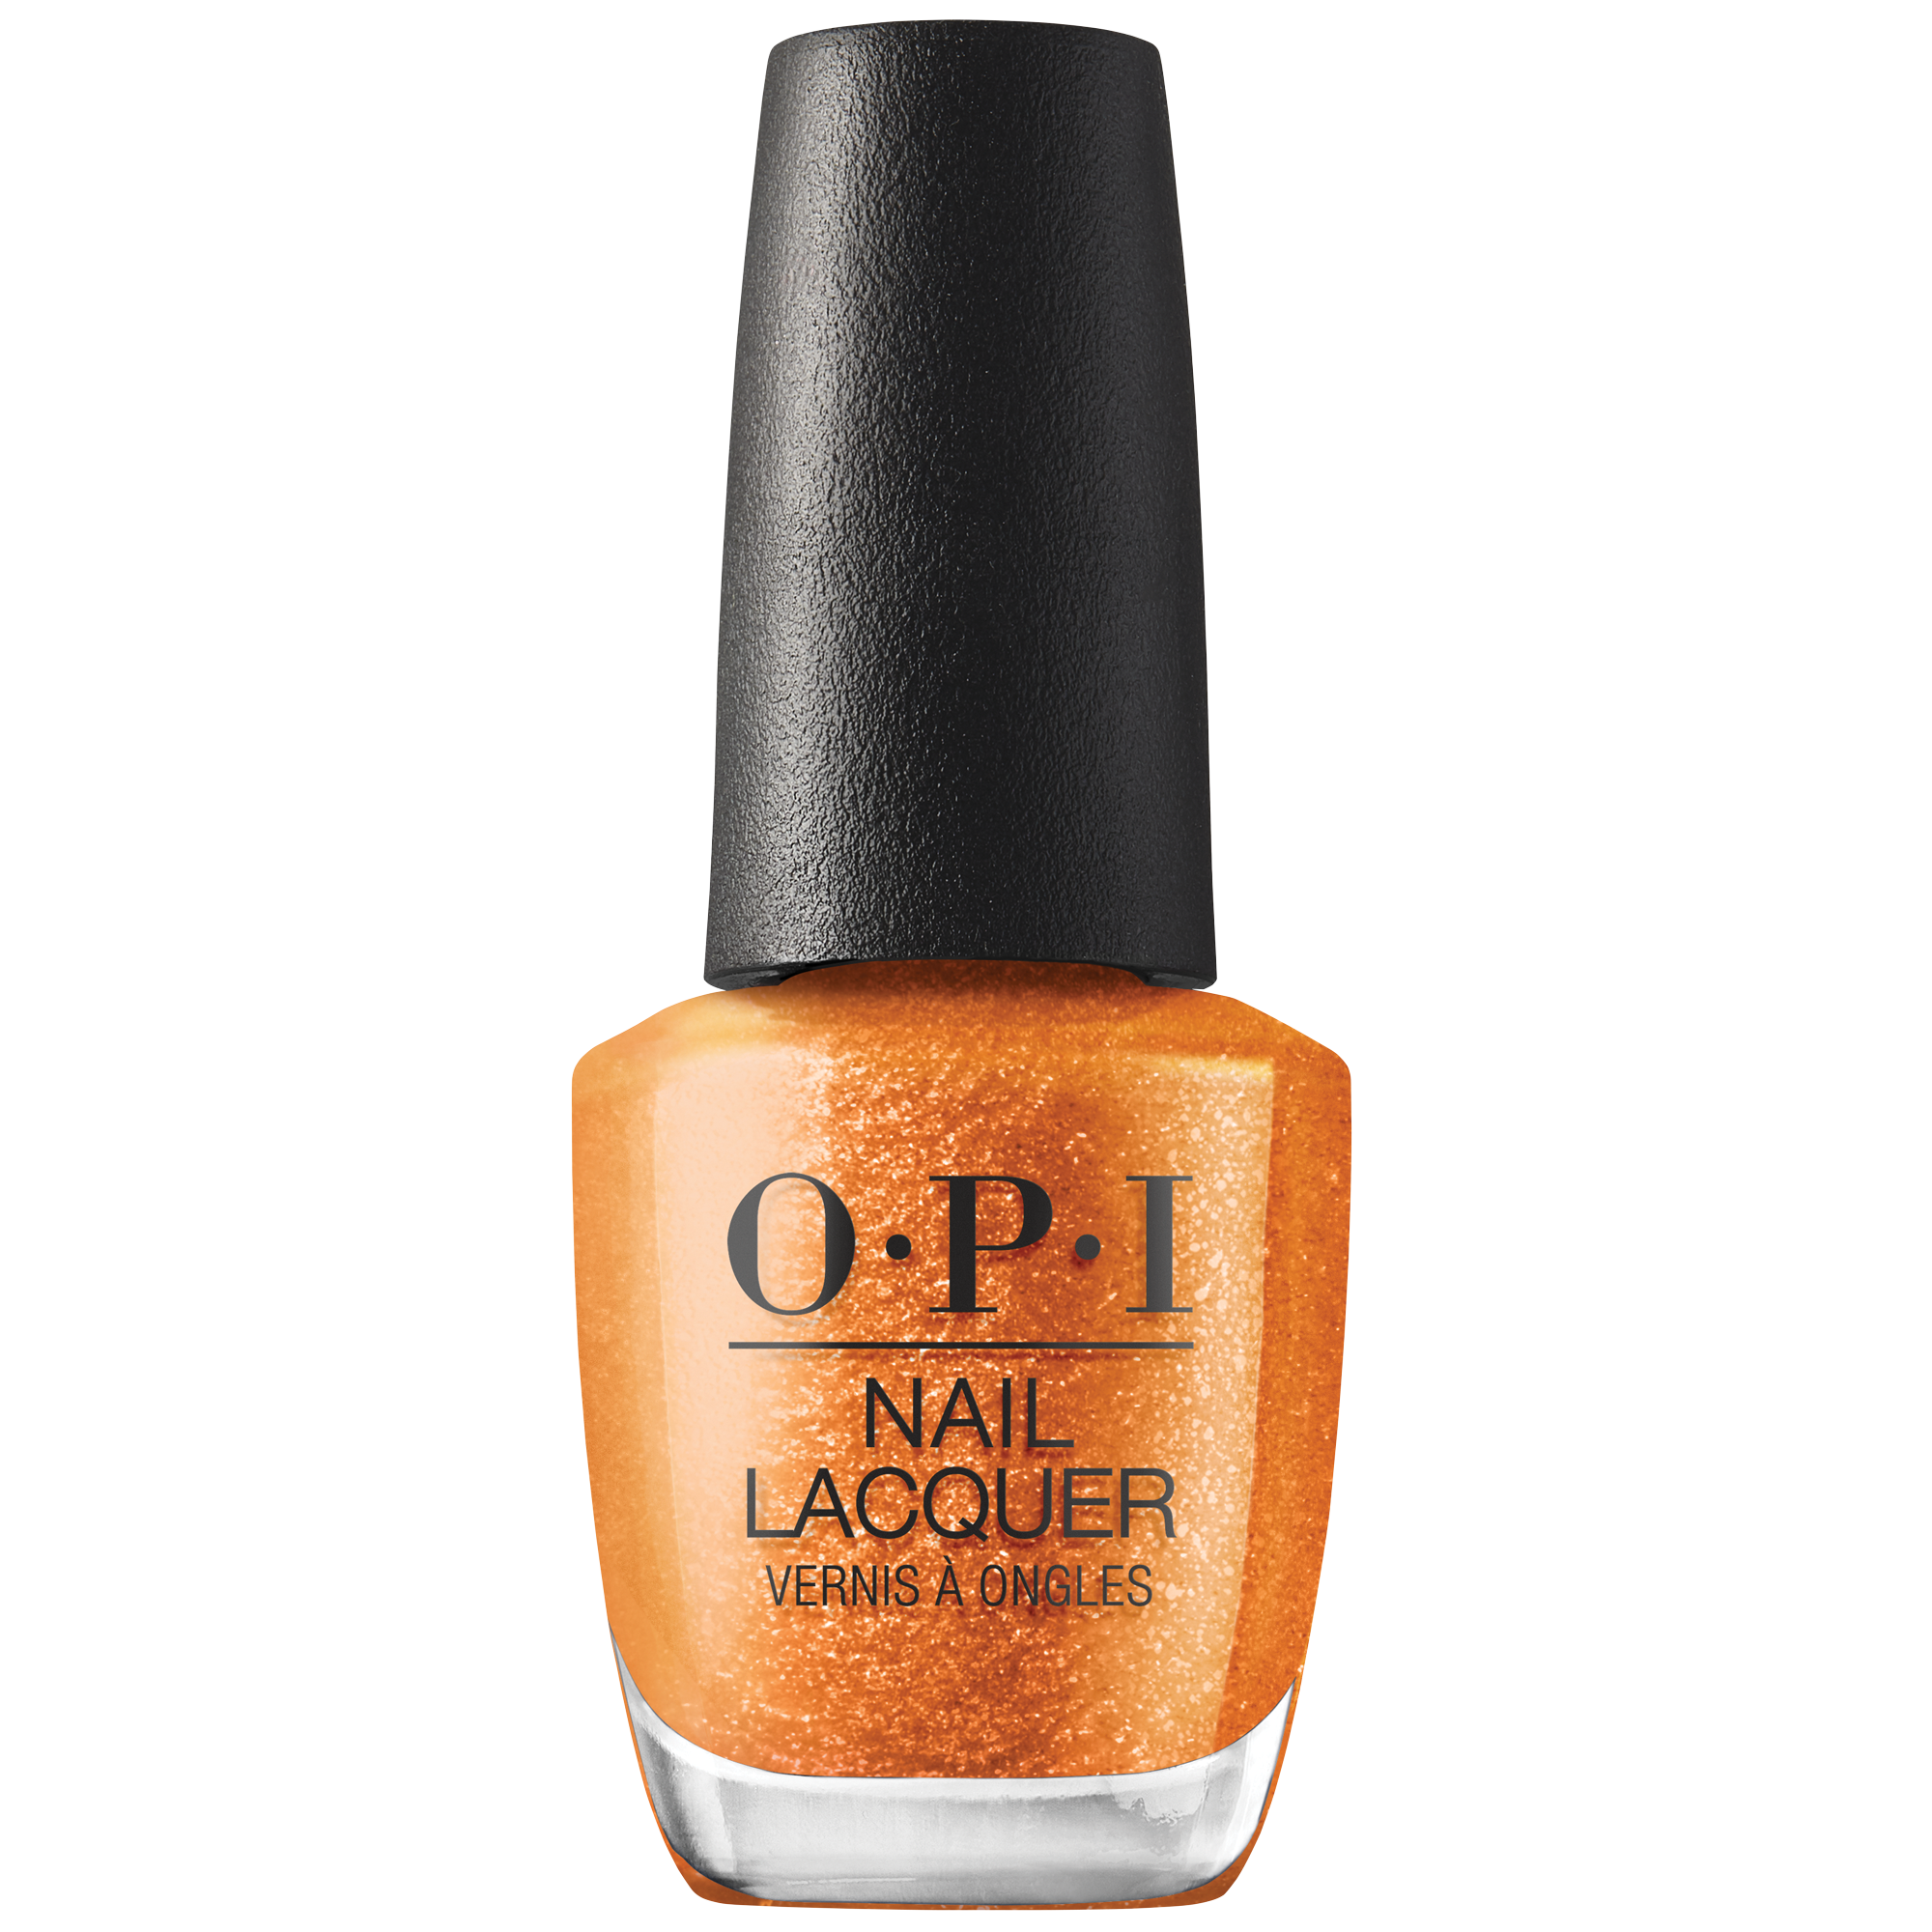 OPI Your Way: gLITer